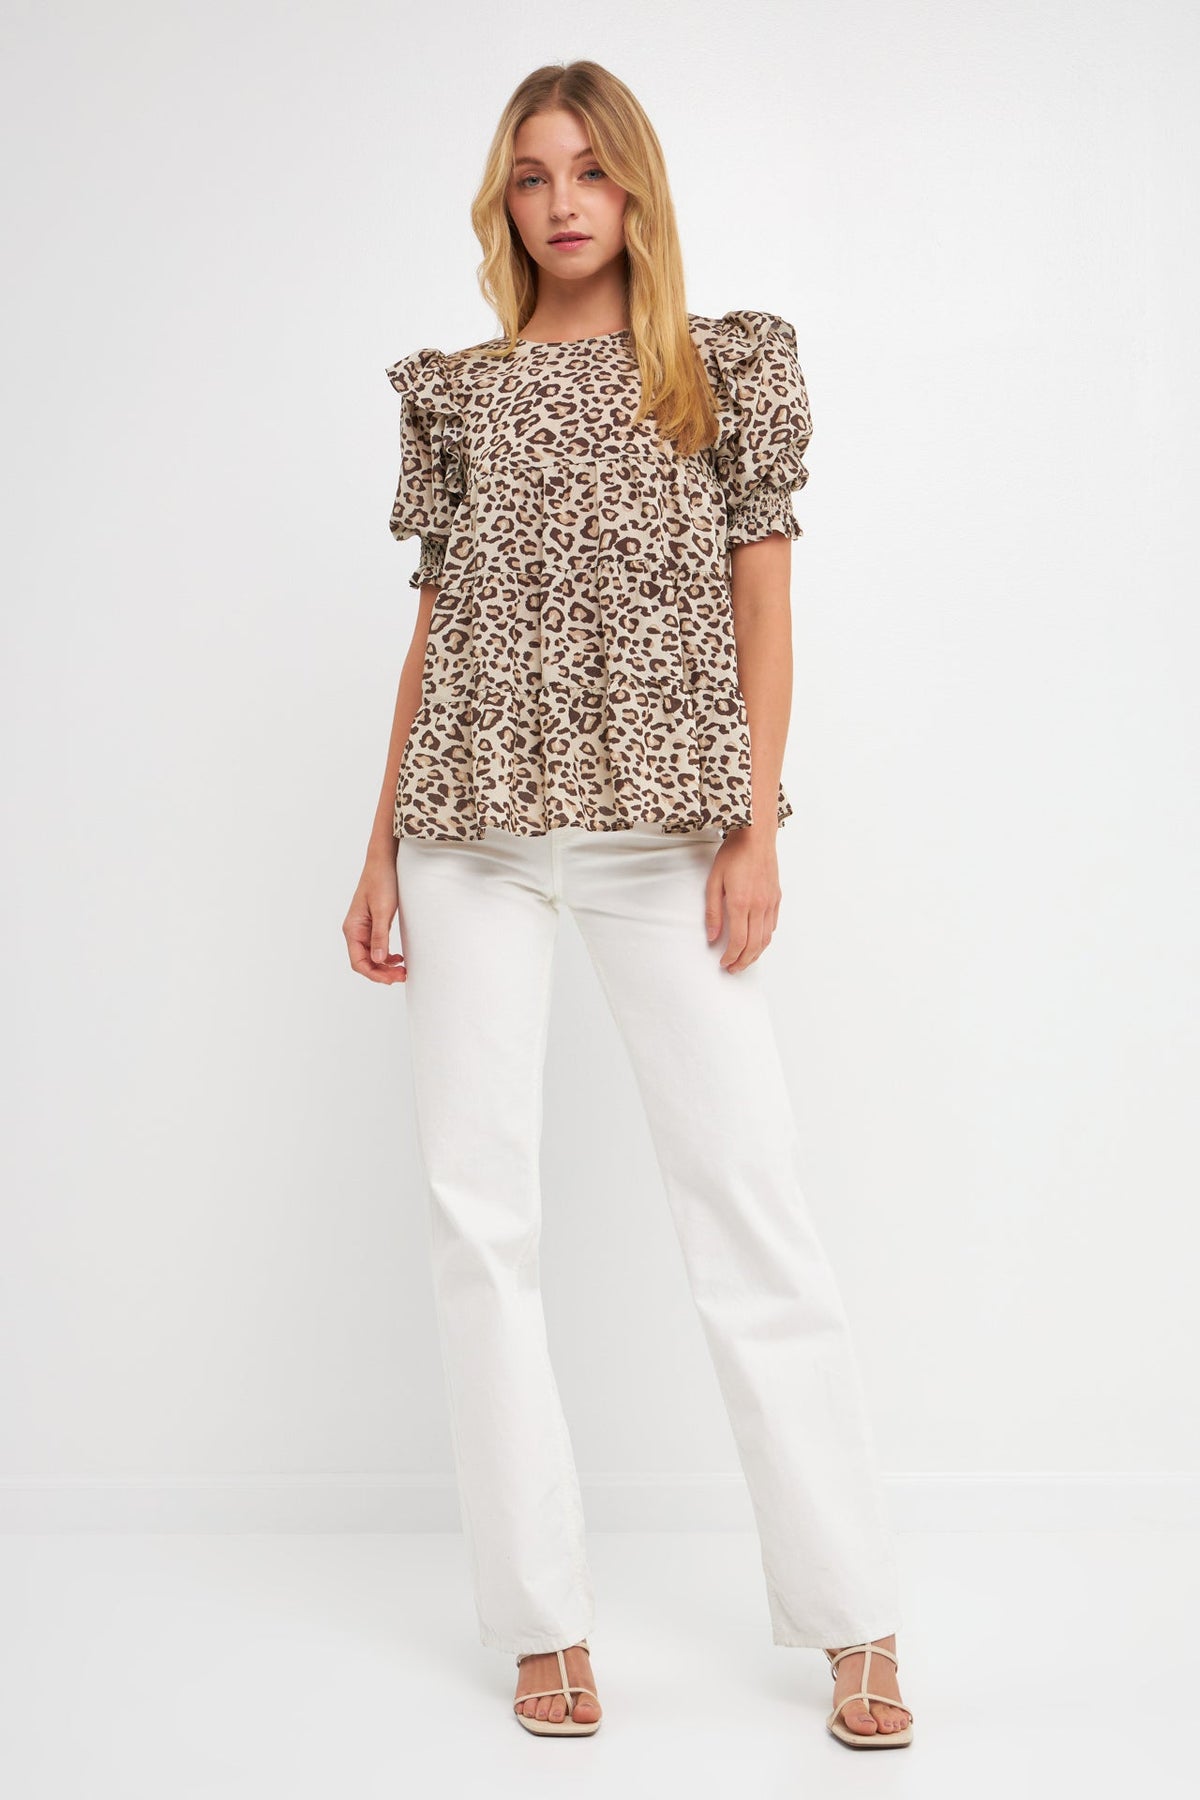 FREE THE ROSES - Animal Print Tiered Blouse - SHIRTS & BLOUSES available at Objectrare